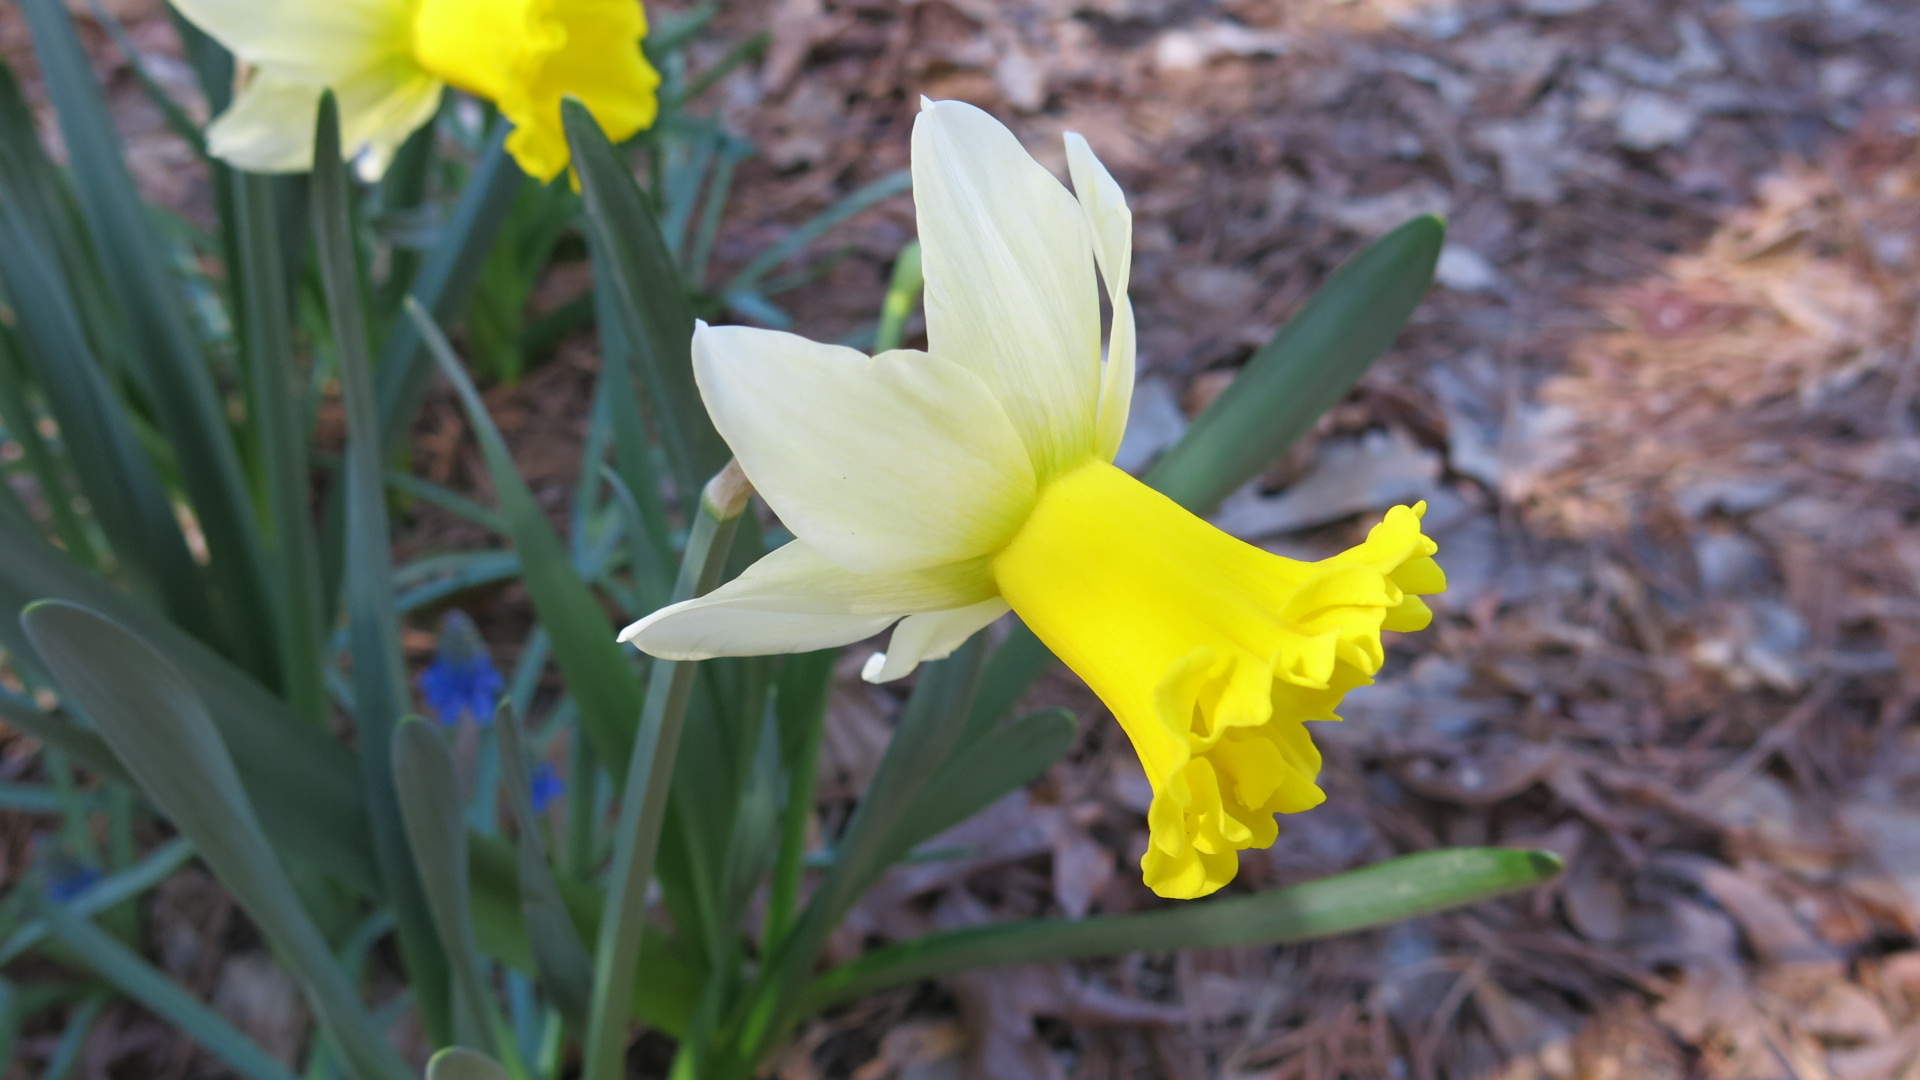 Narcissus 'Wisley' is an example of the Division 6 Cyclamineus class.